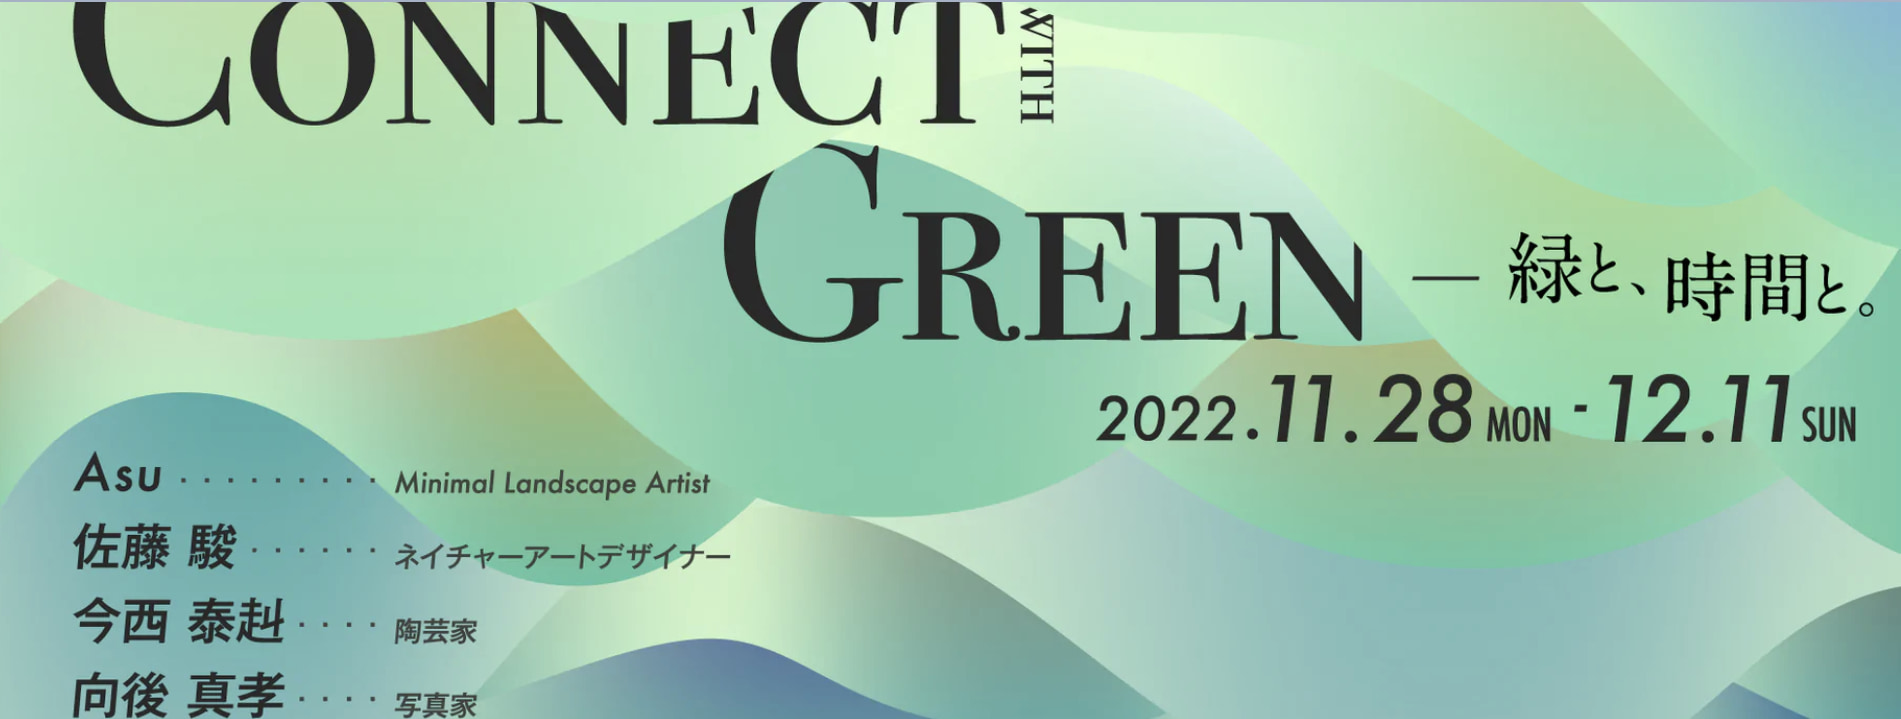 Connect with Greenー緑と時間と。